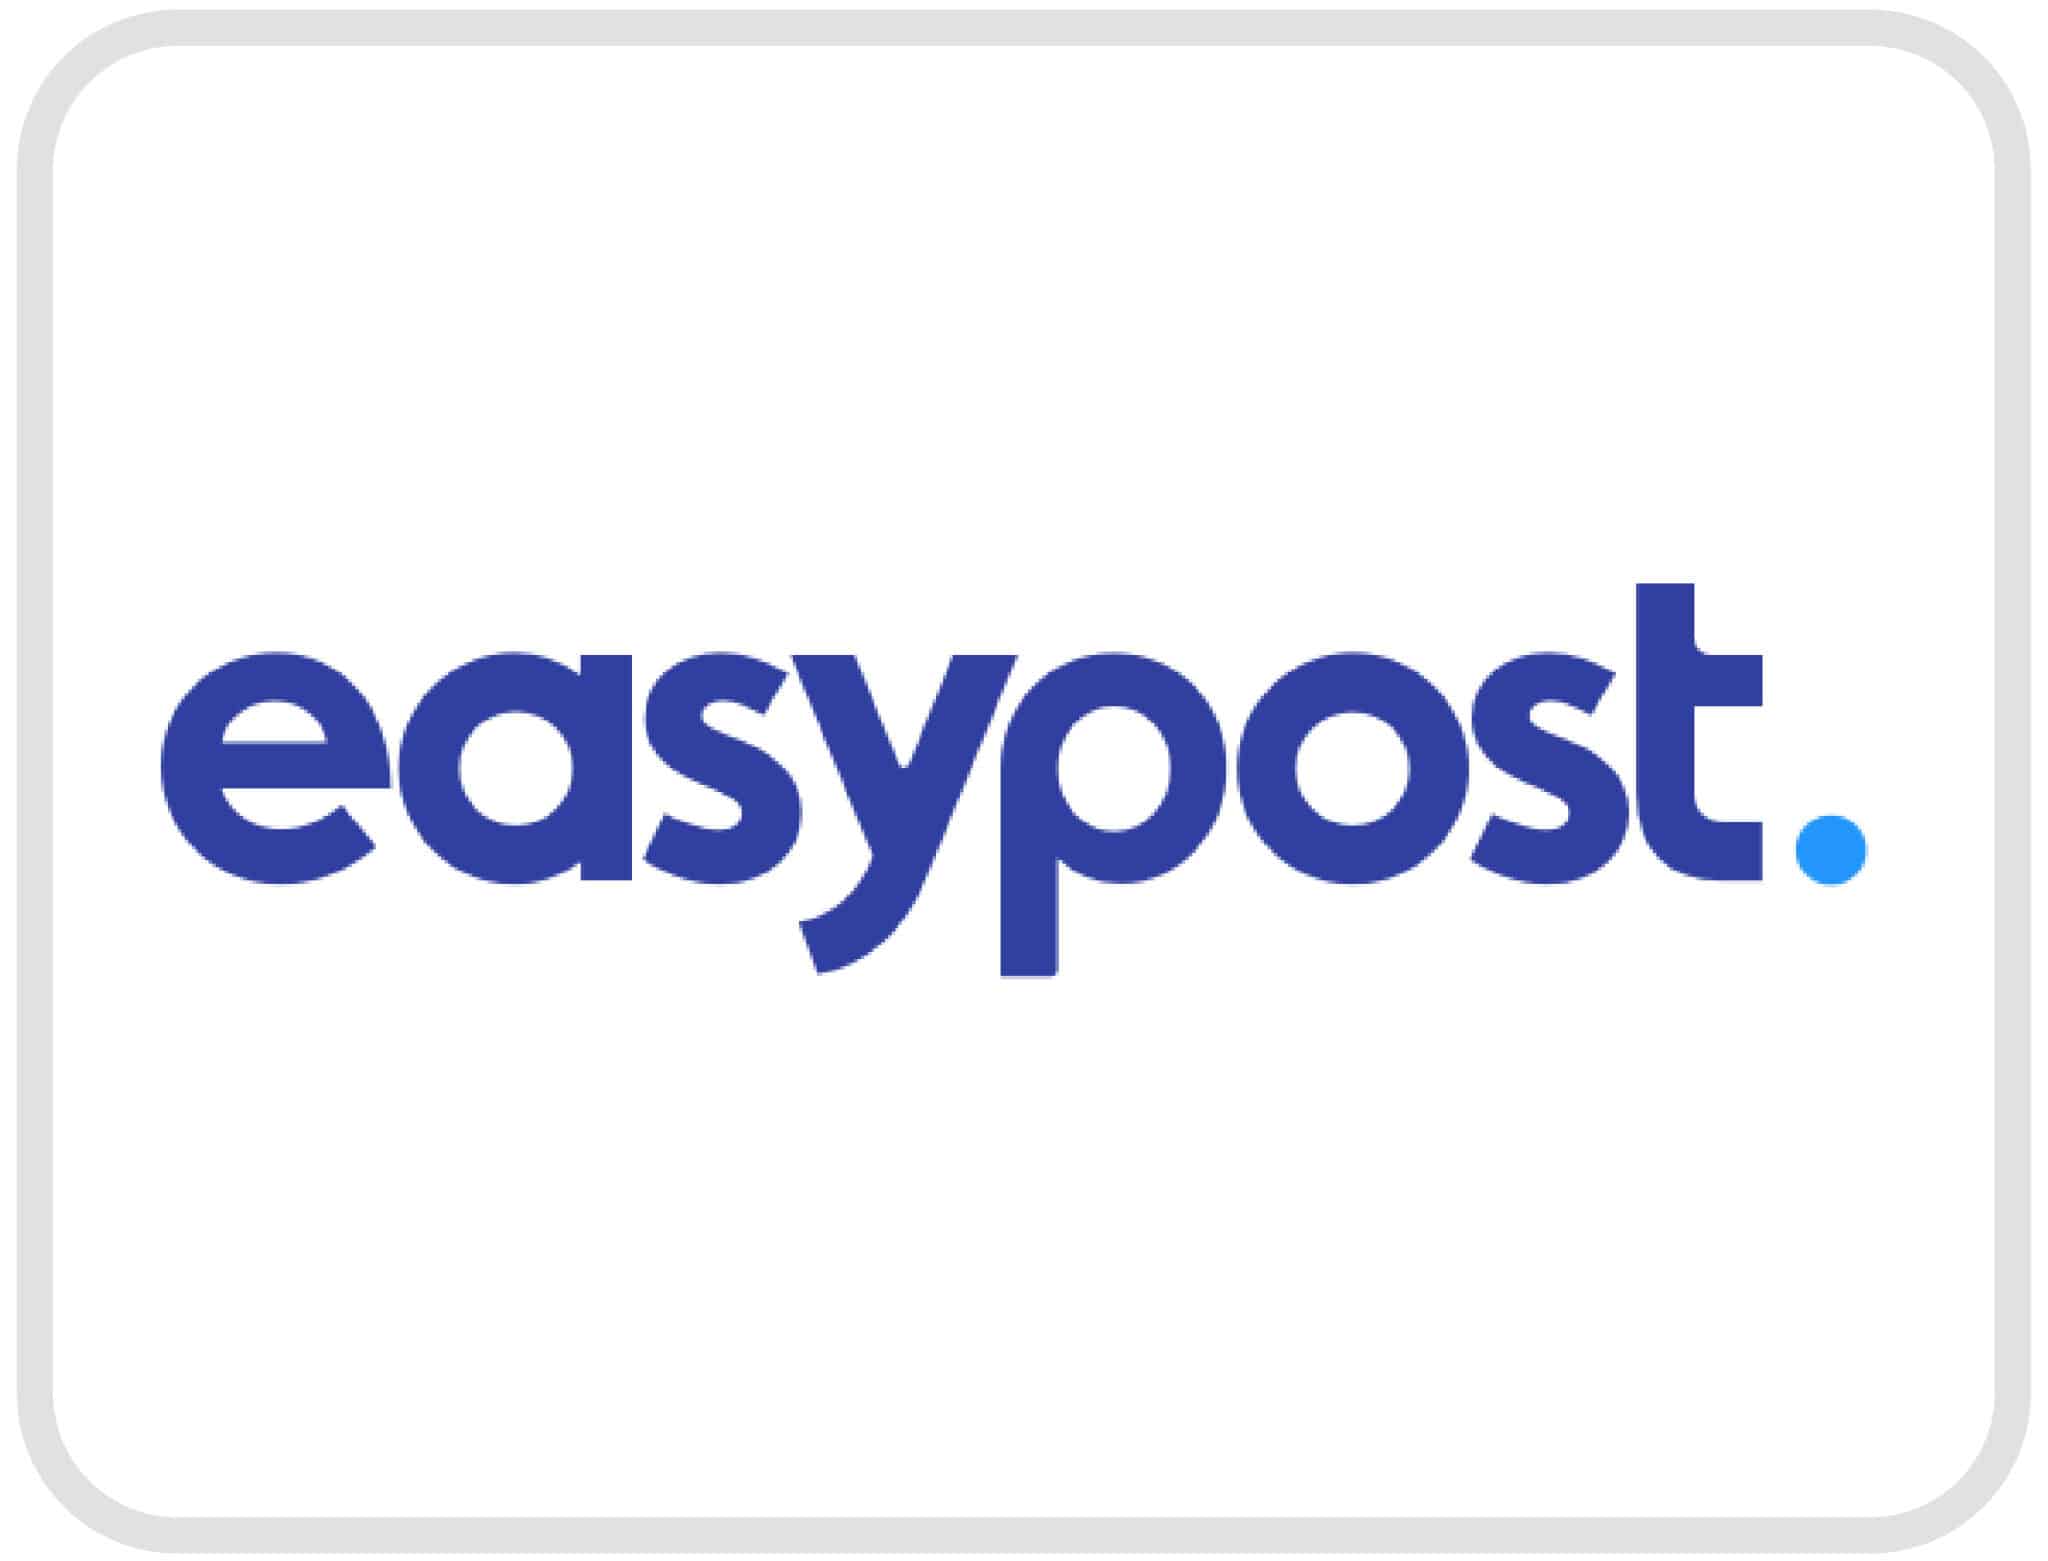 This is the easypost logo